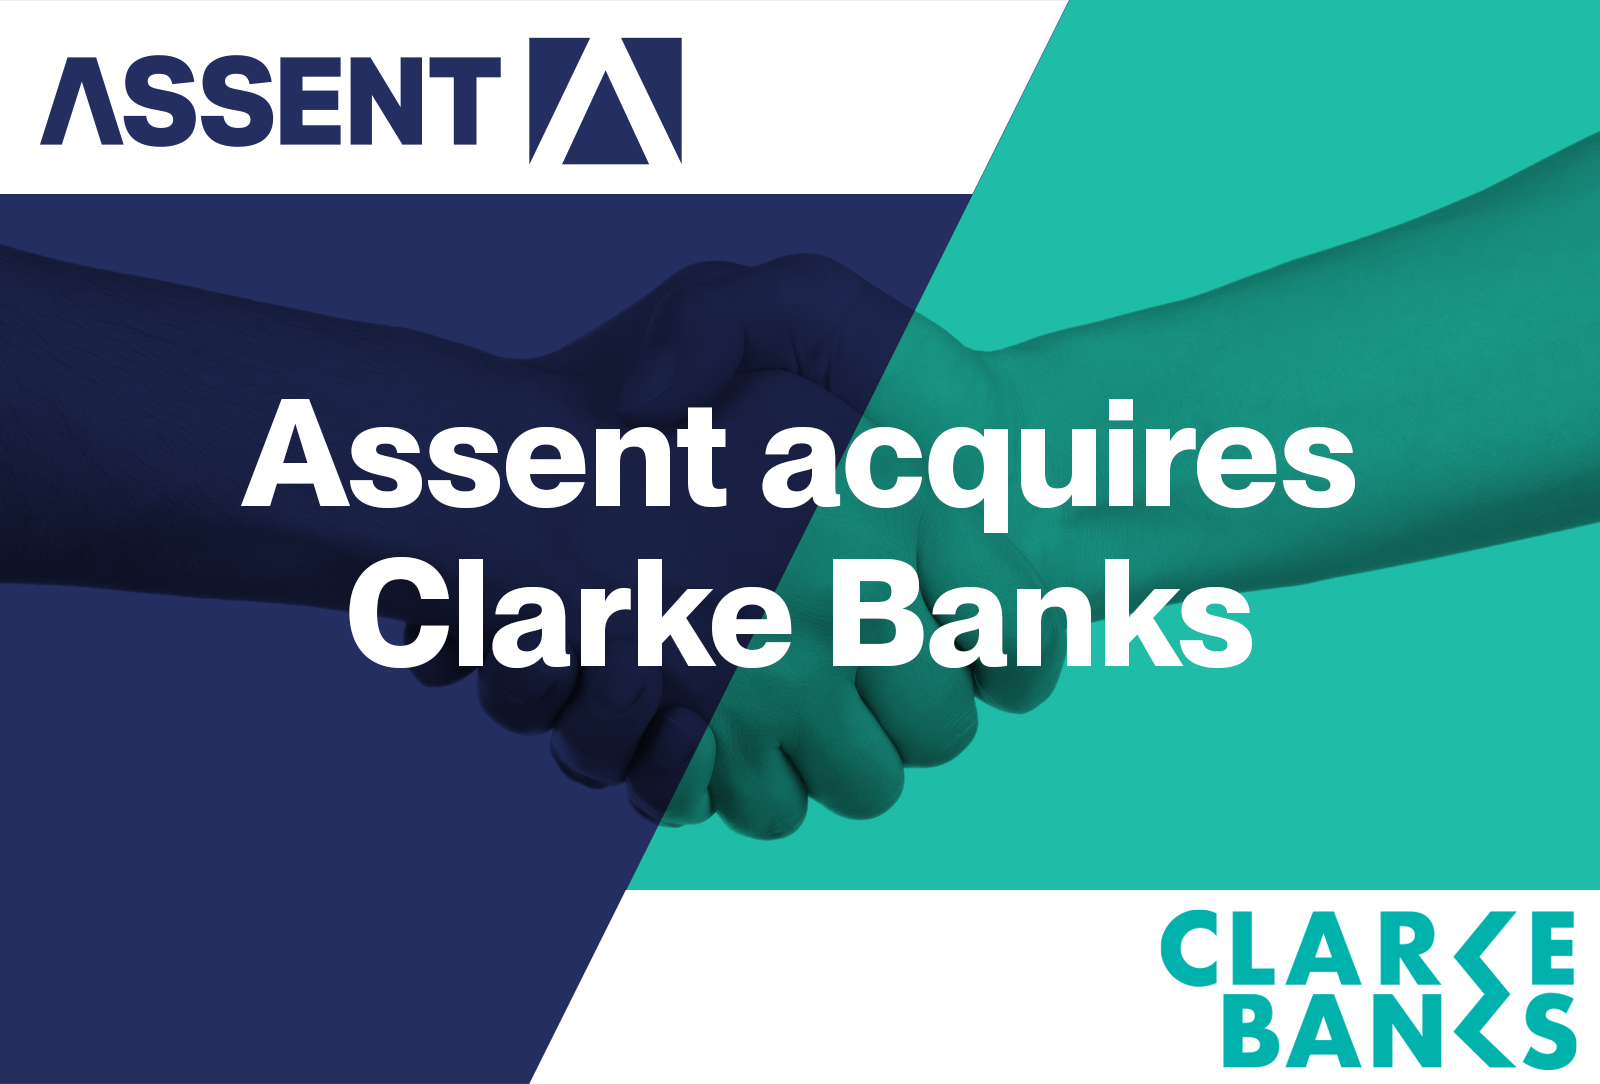 Assent Acquires Clarke Banks to Strengthen the Group, Further Expanding Into Fire Safety Services